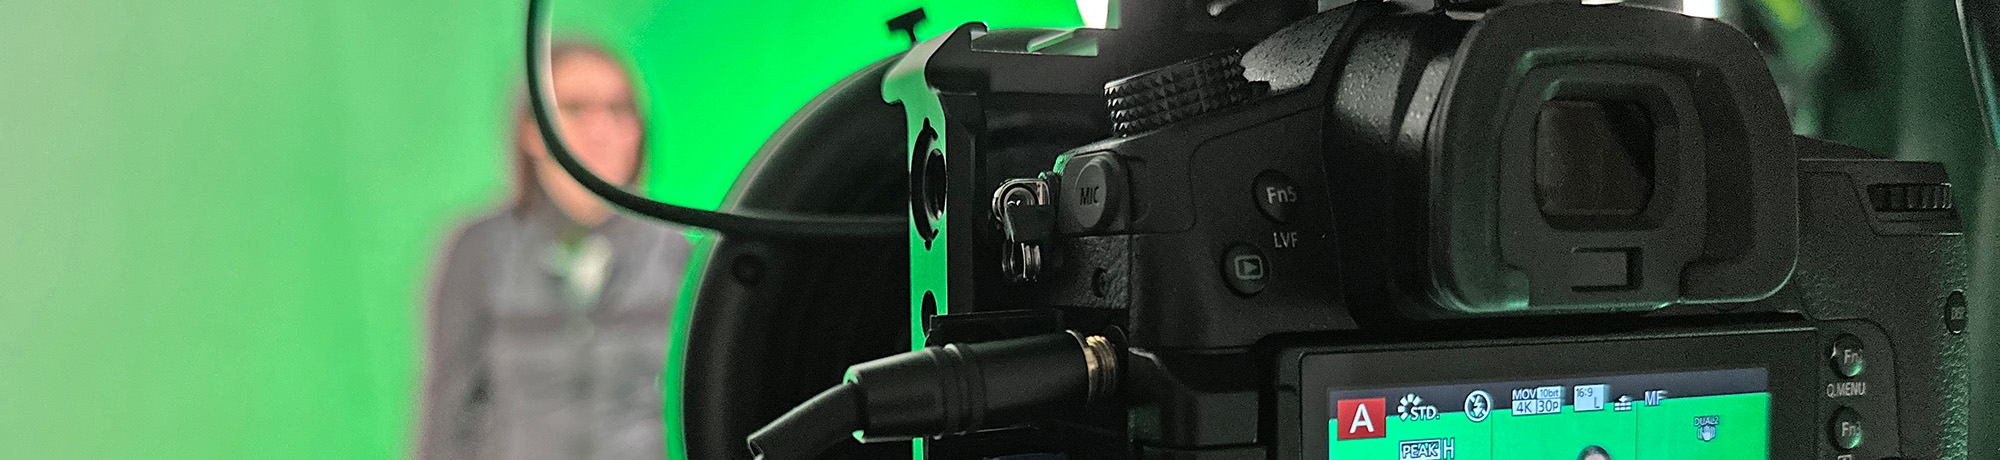 Photo of video studio camera in the foreground. The background is blurry with a person standing in front of a green screen.